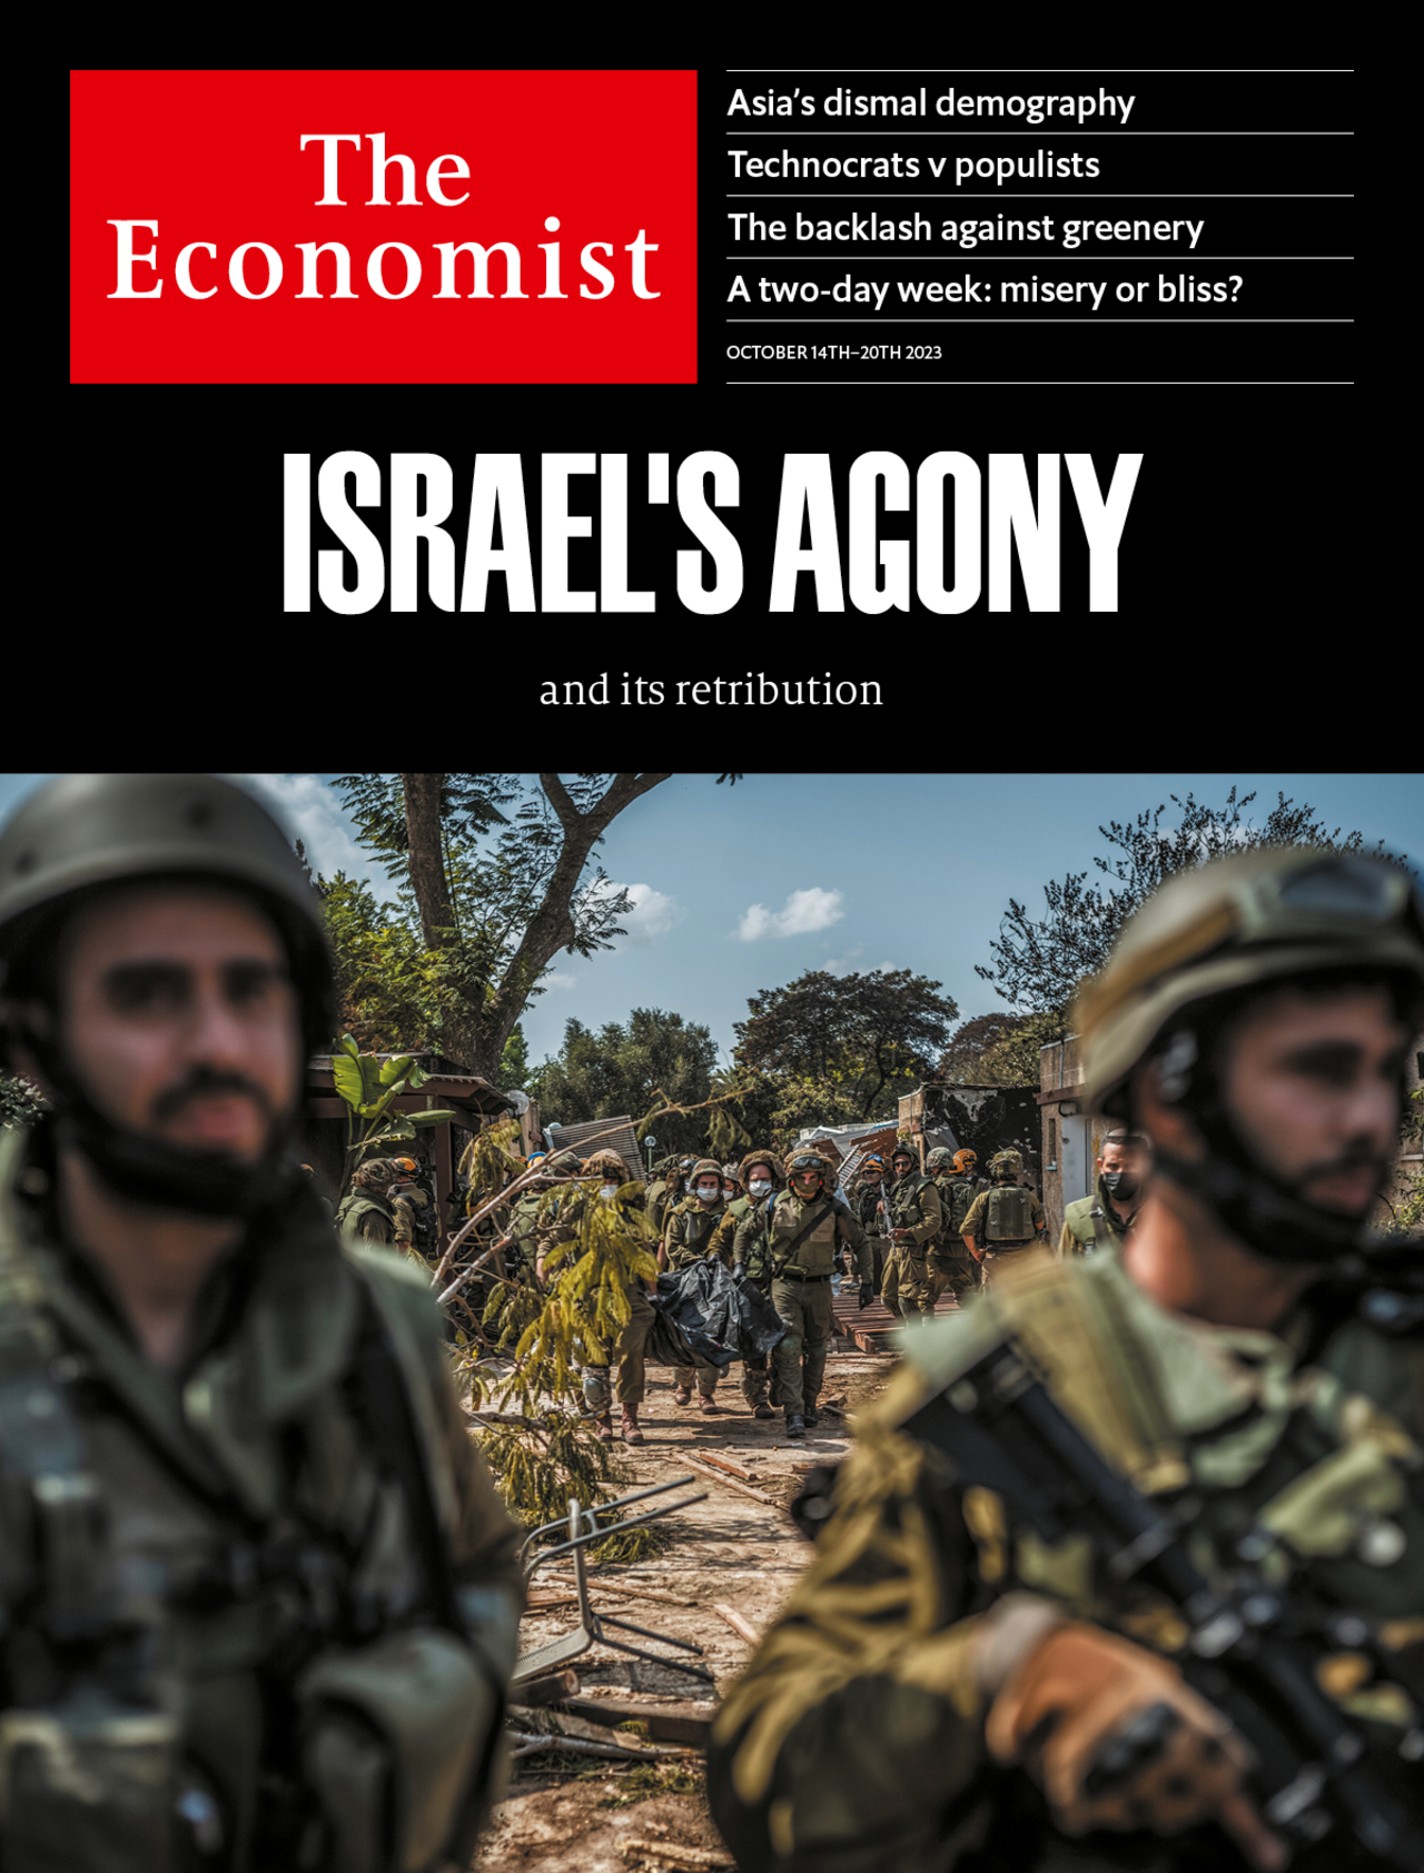 Israel’s agony and its retribution